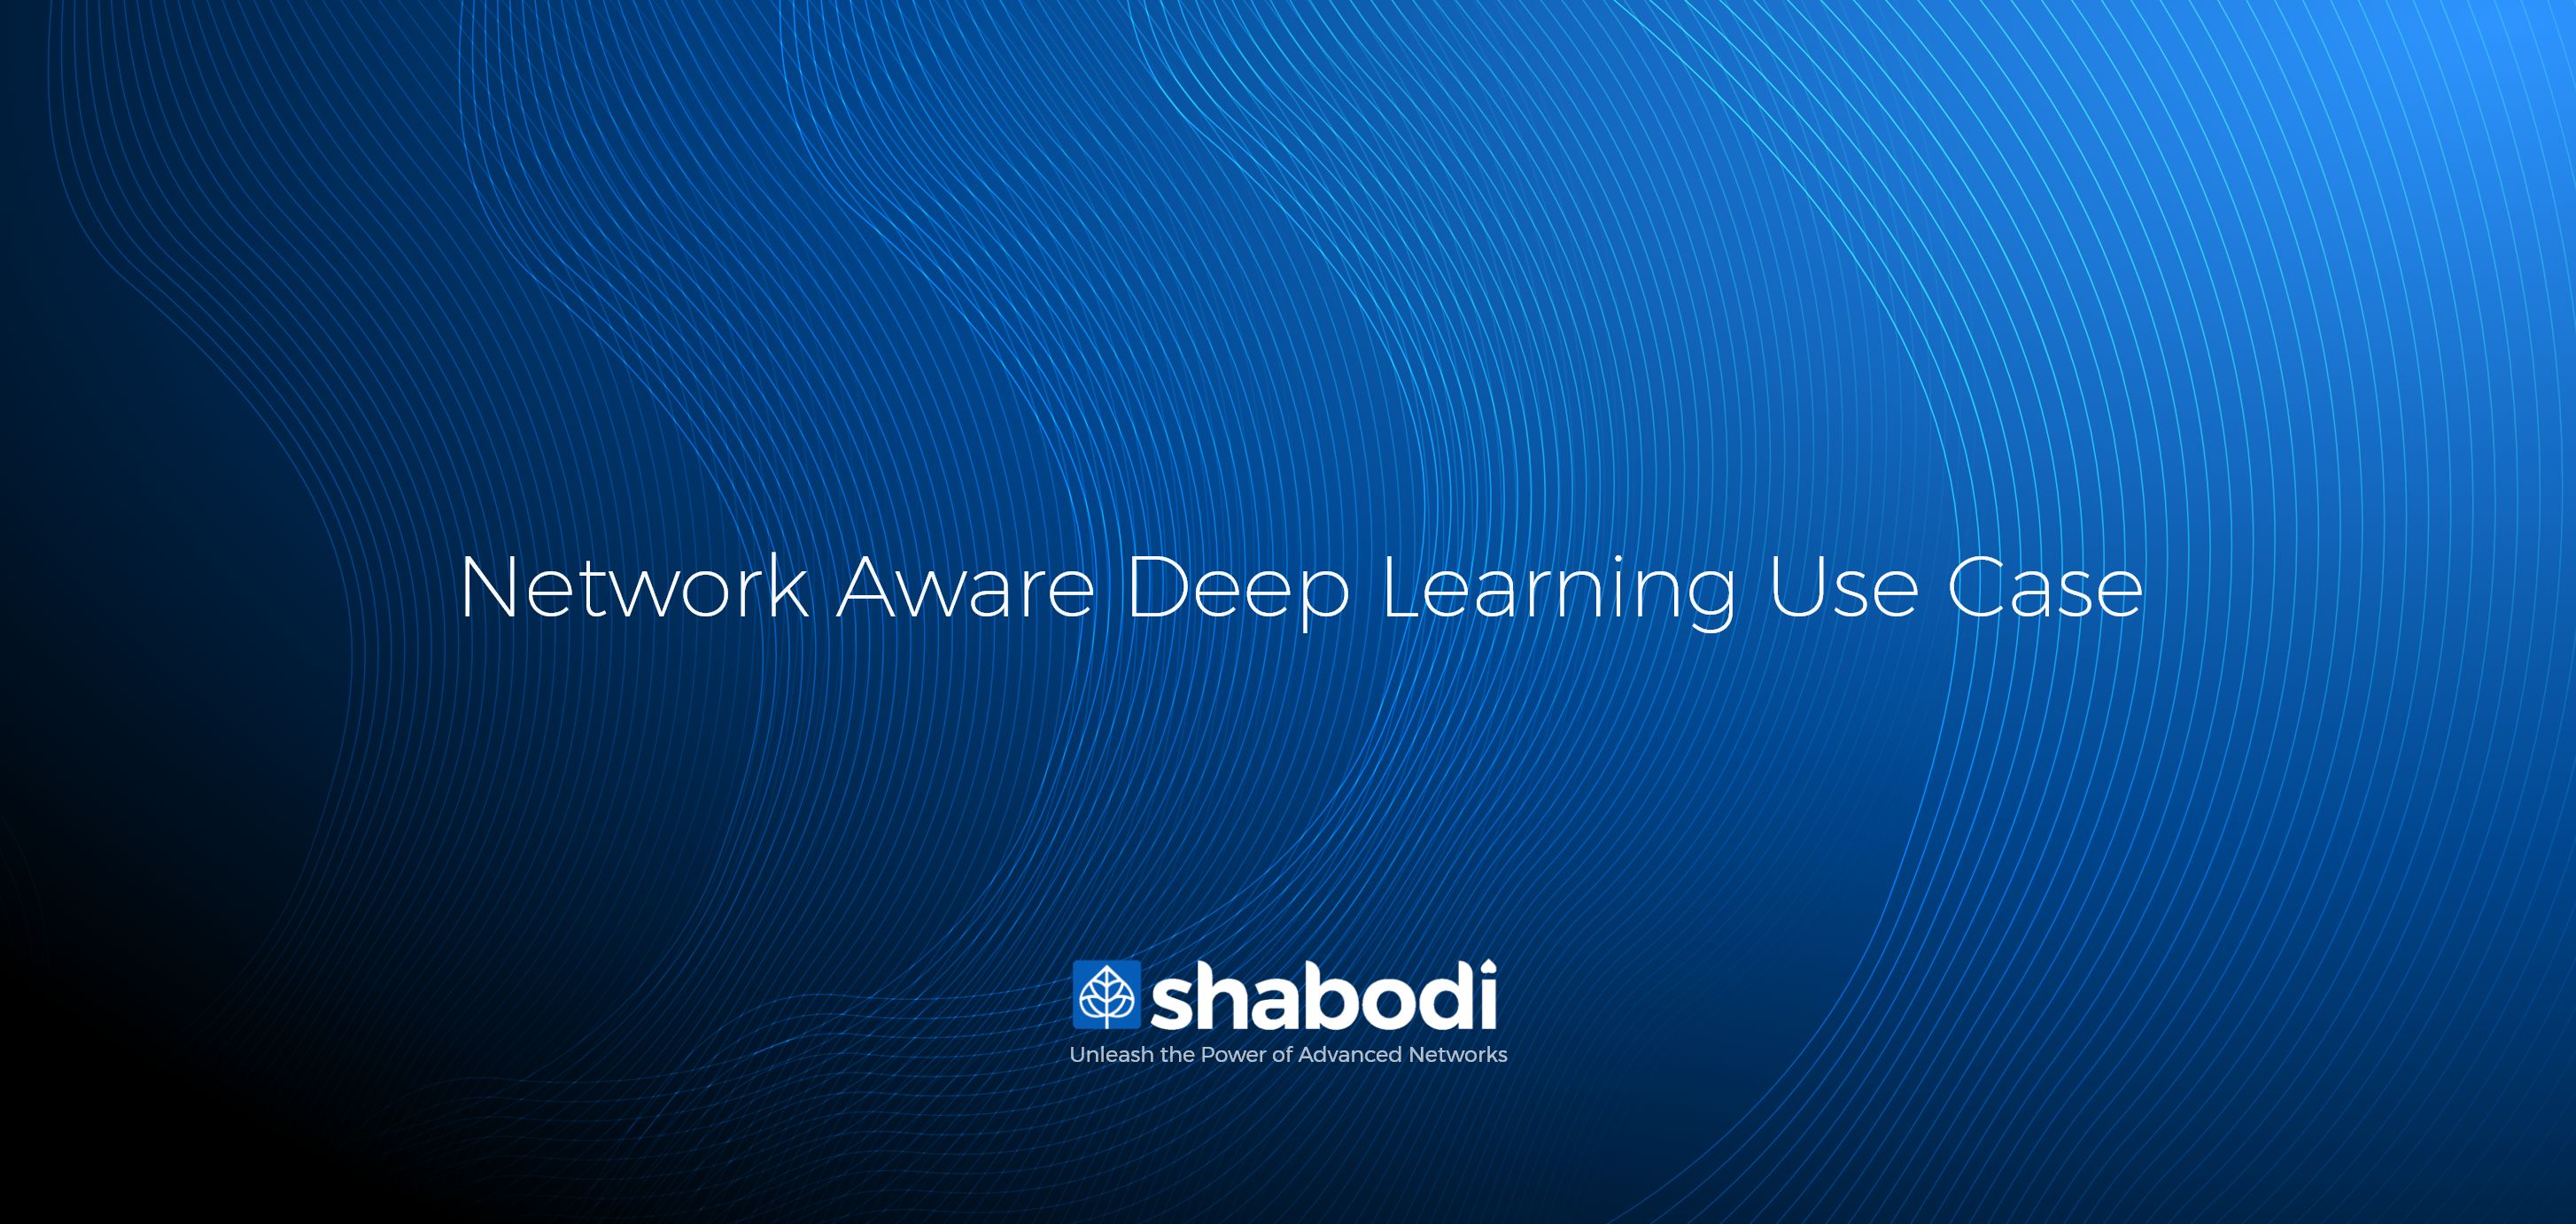 Network Aware Deep Learning Use Case